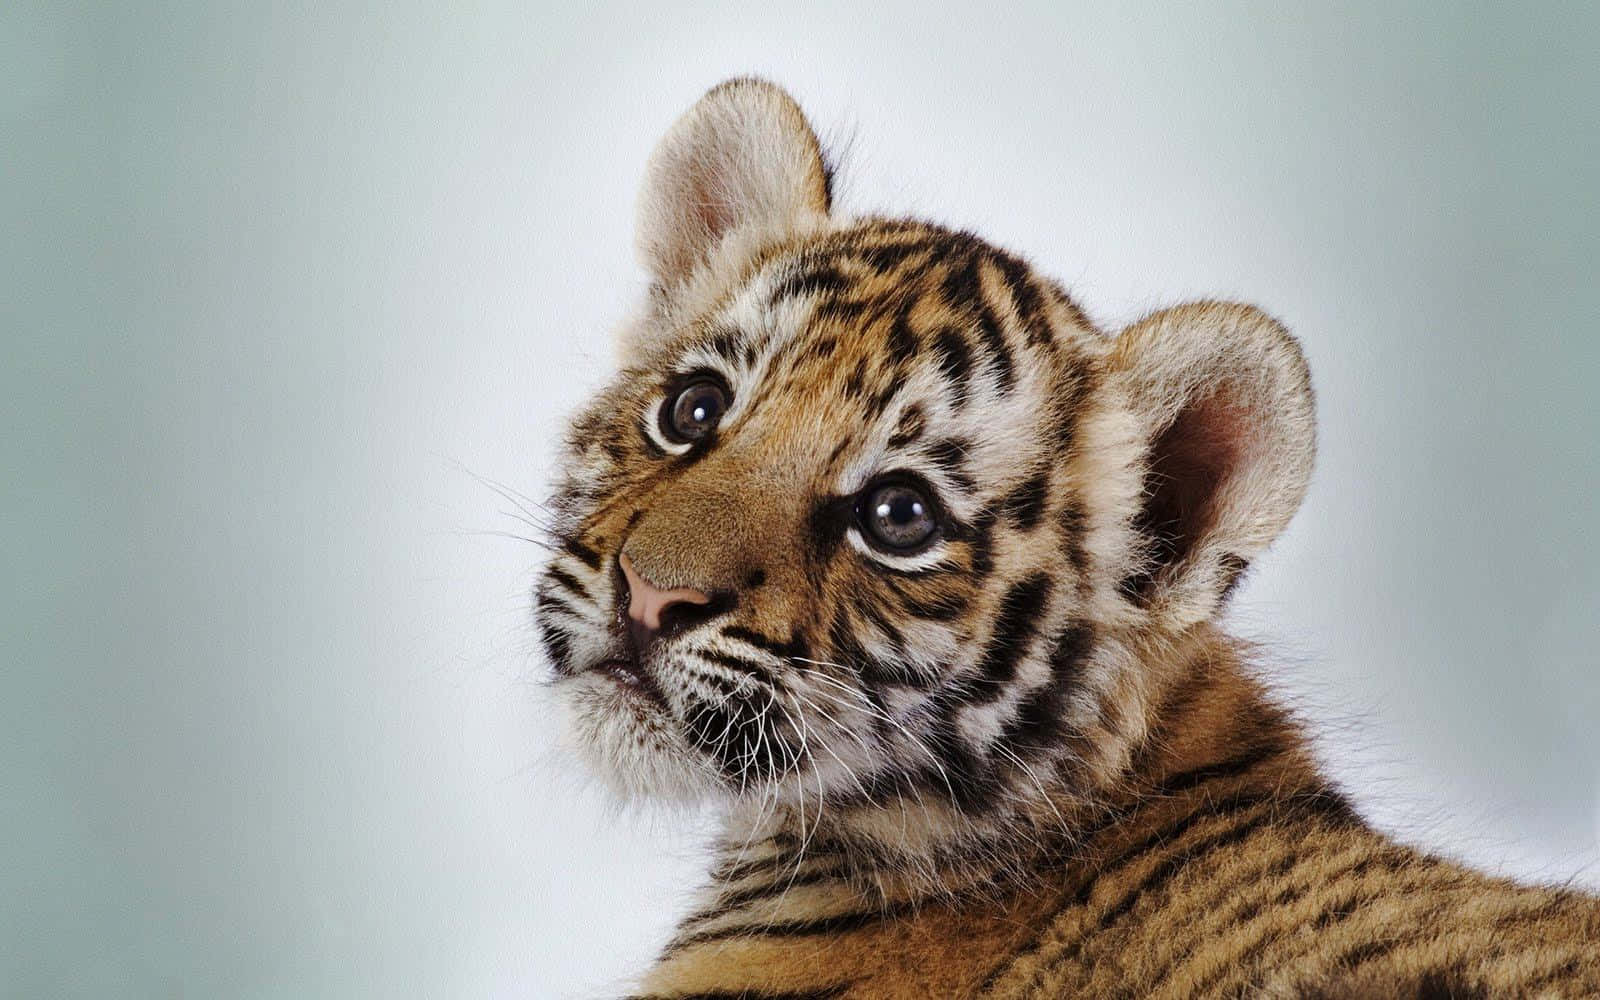 Adorable baby animals to brighten your day